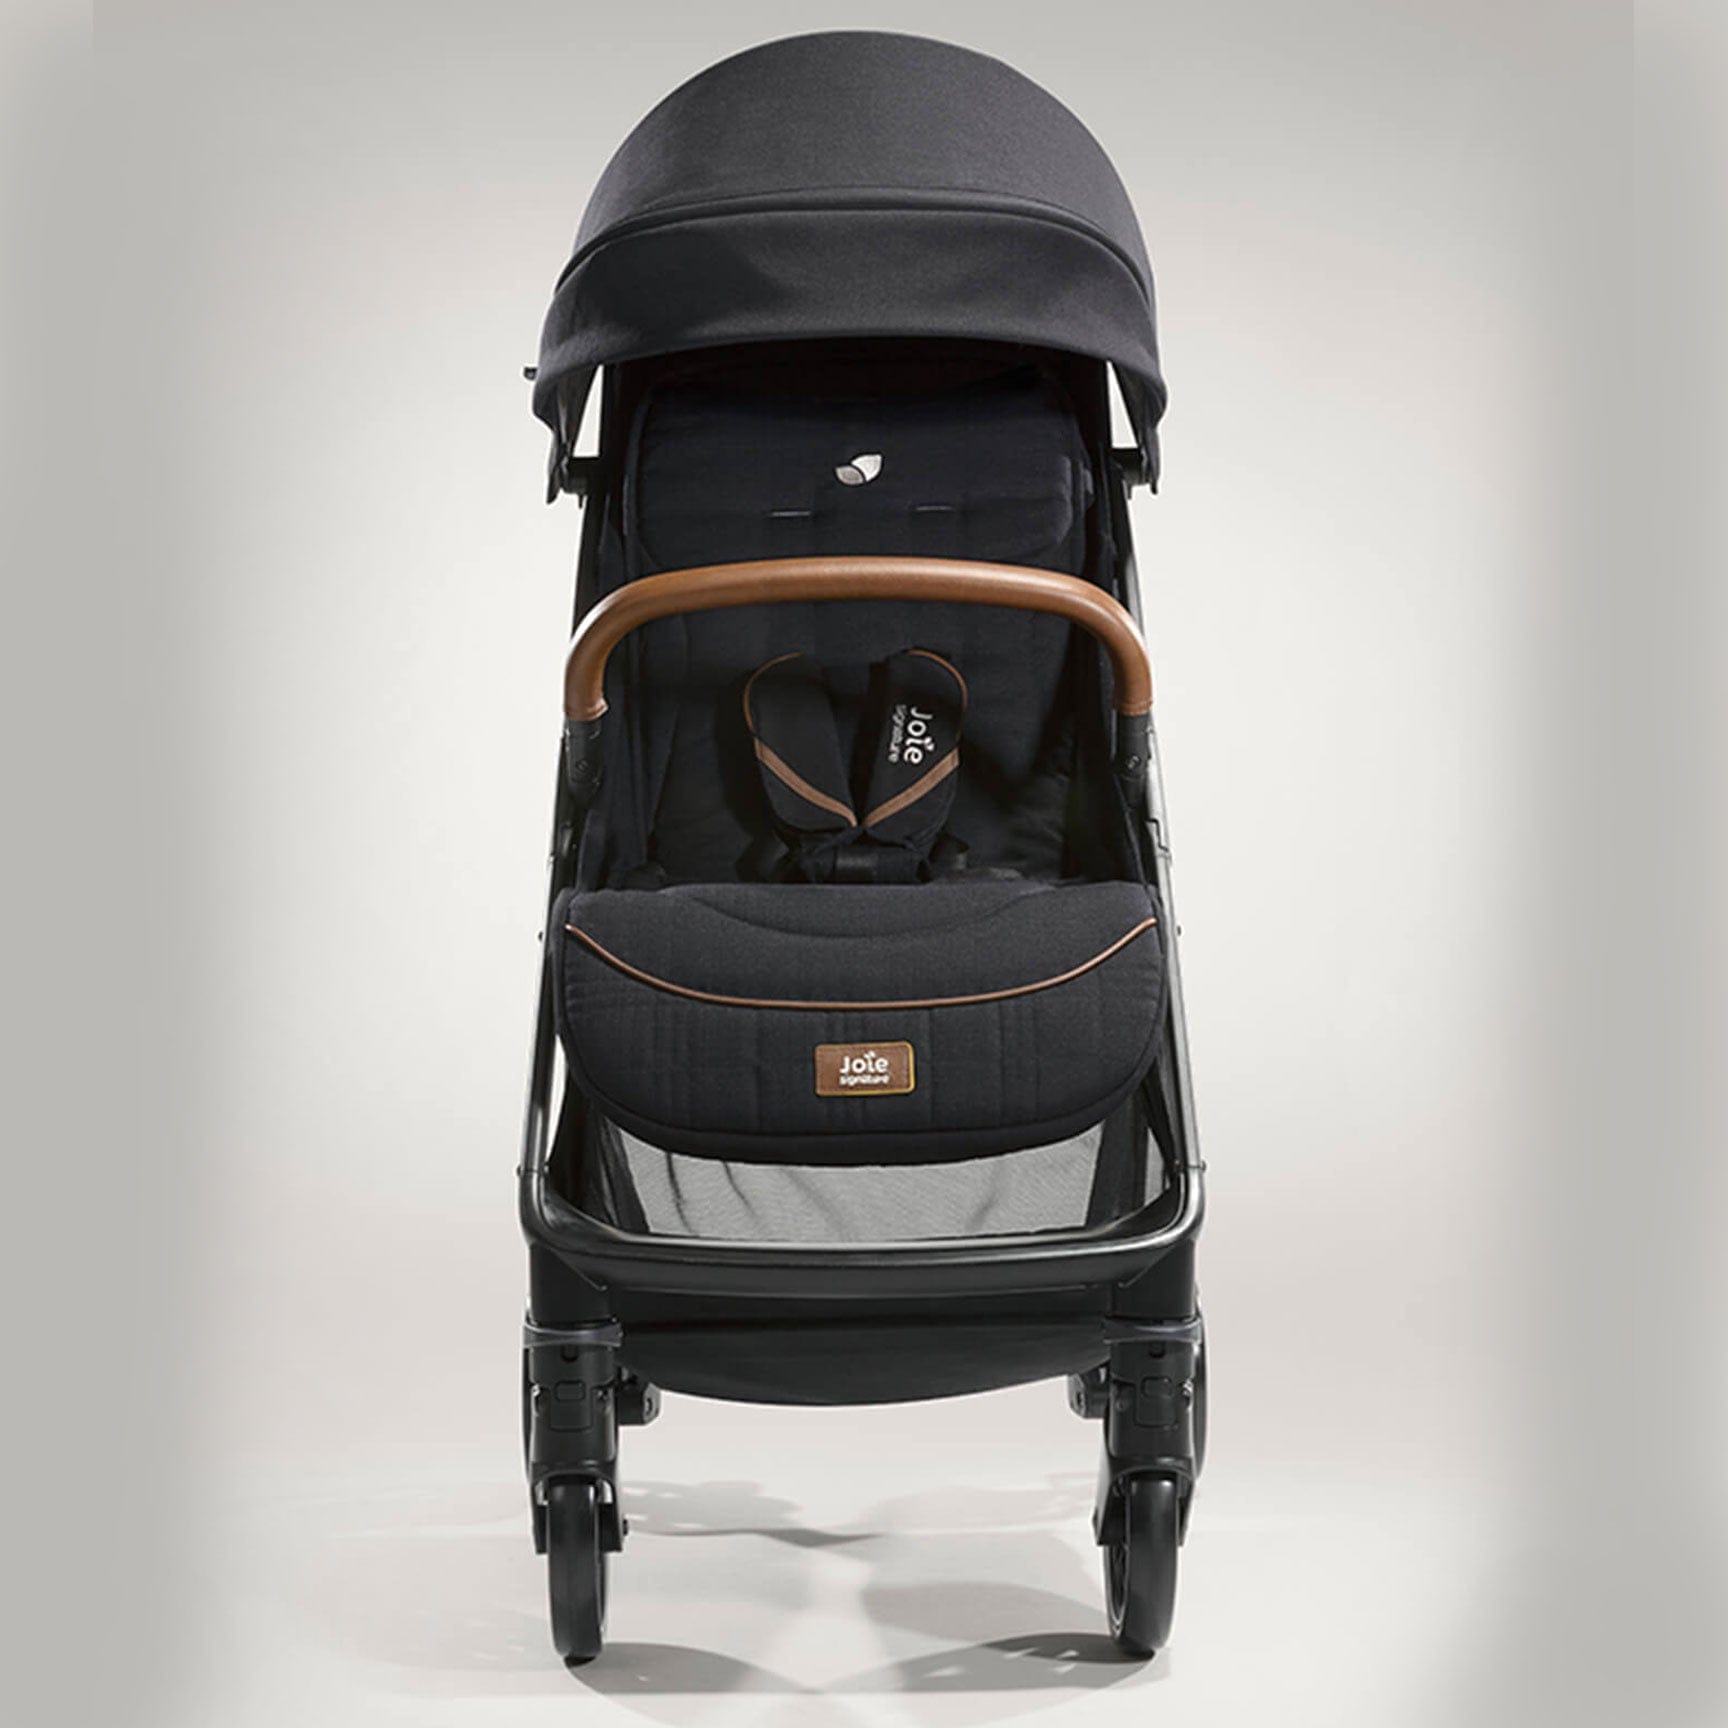 Joie Parcel Signature Stroller in Eclipse S2112AAECL000